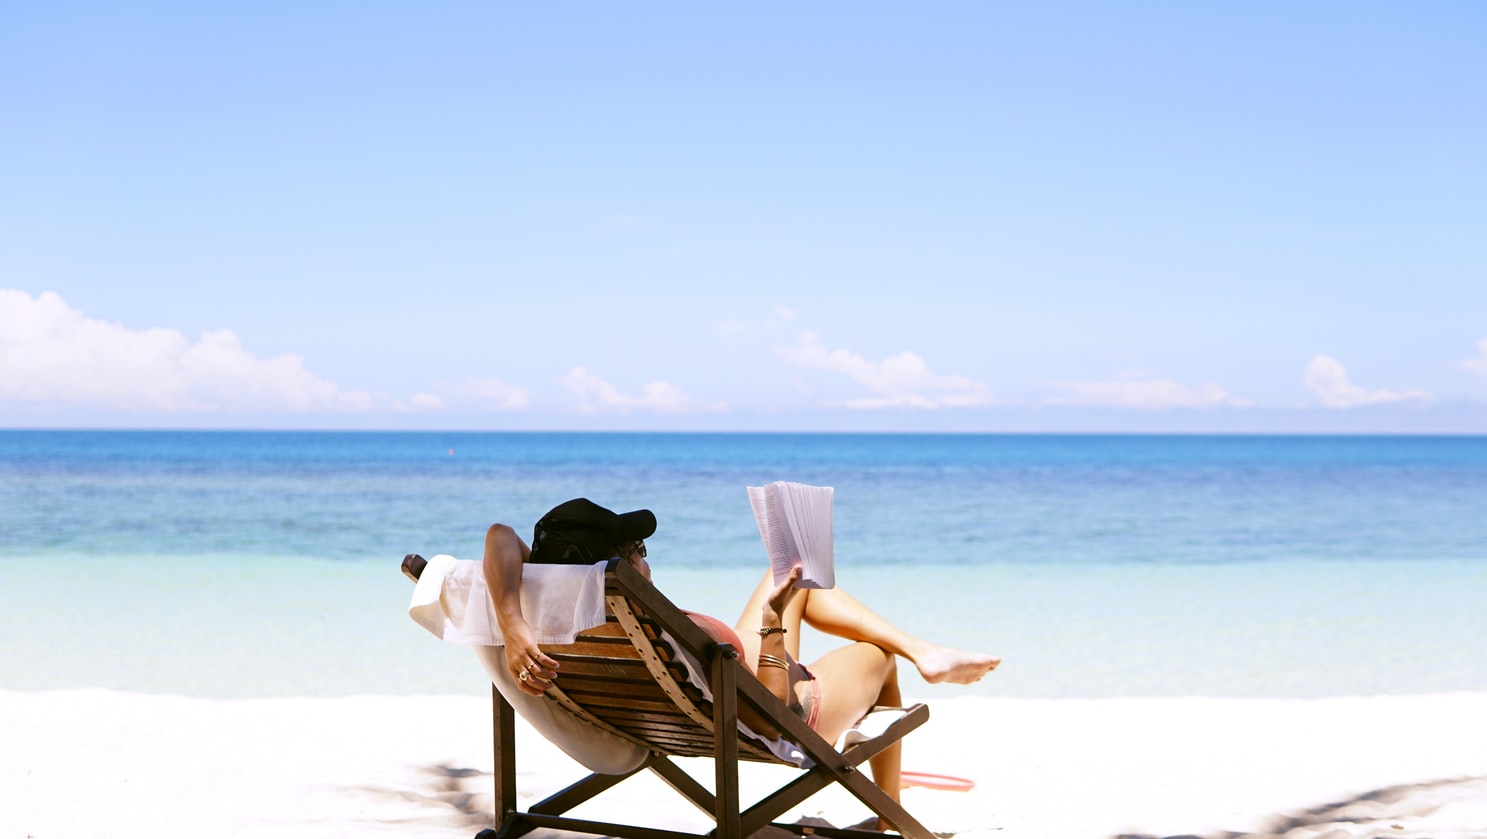 Tips for Having an Active and Fulfilled Vacation